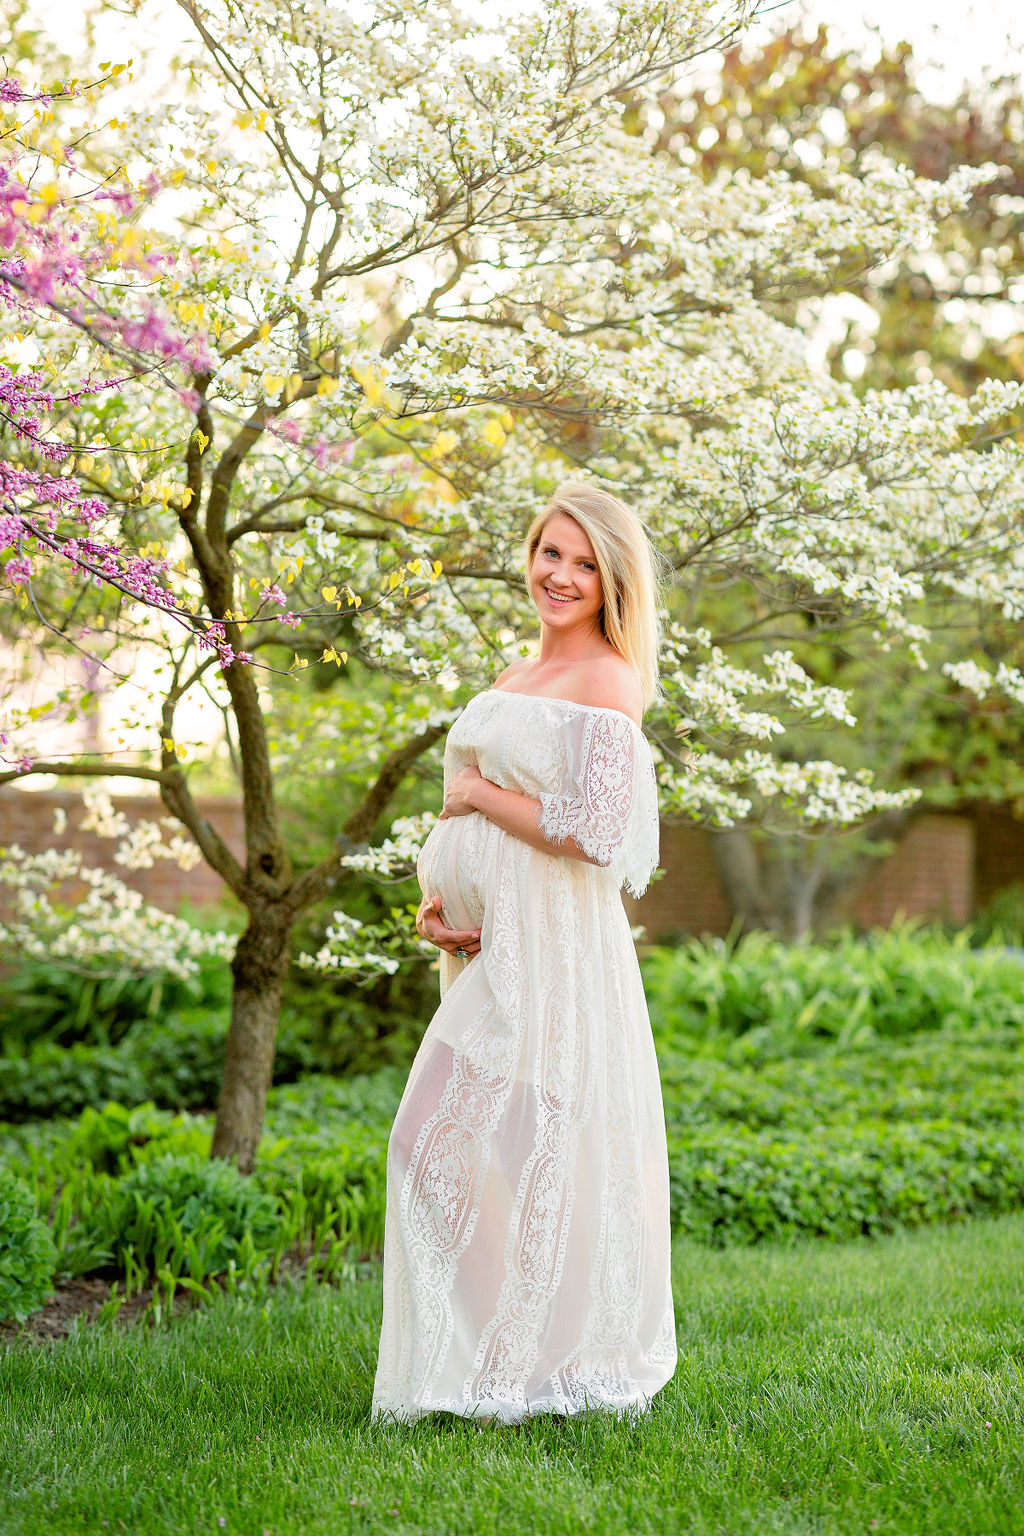 A mother to be stands in a garden with blooming dogwood trees in a white lace maternity gown